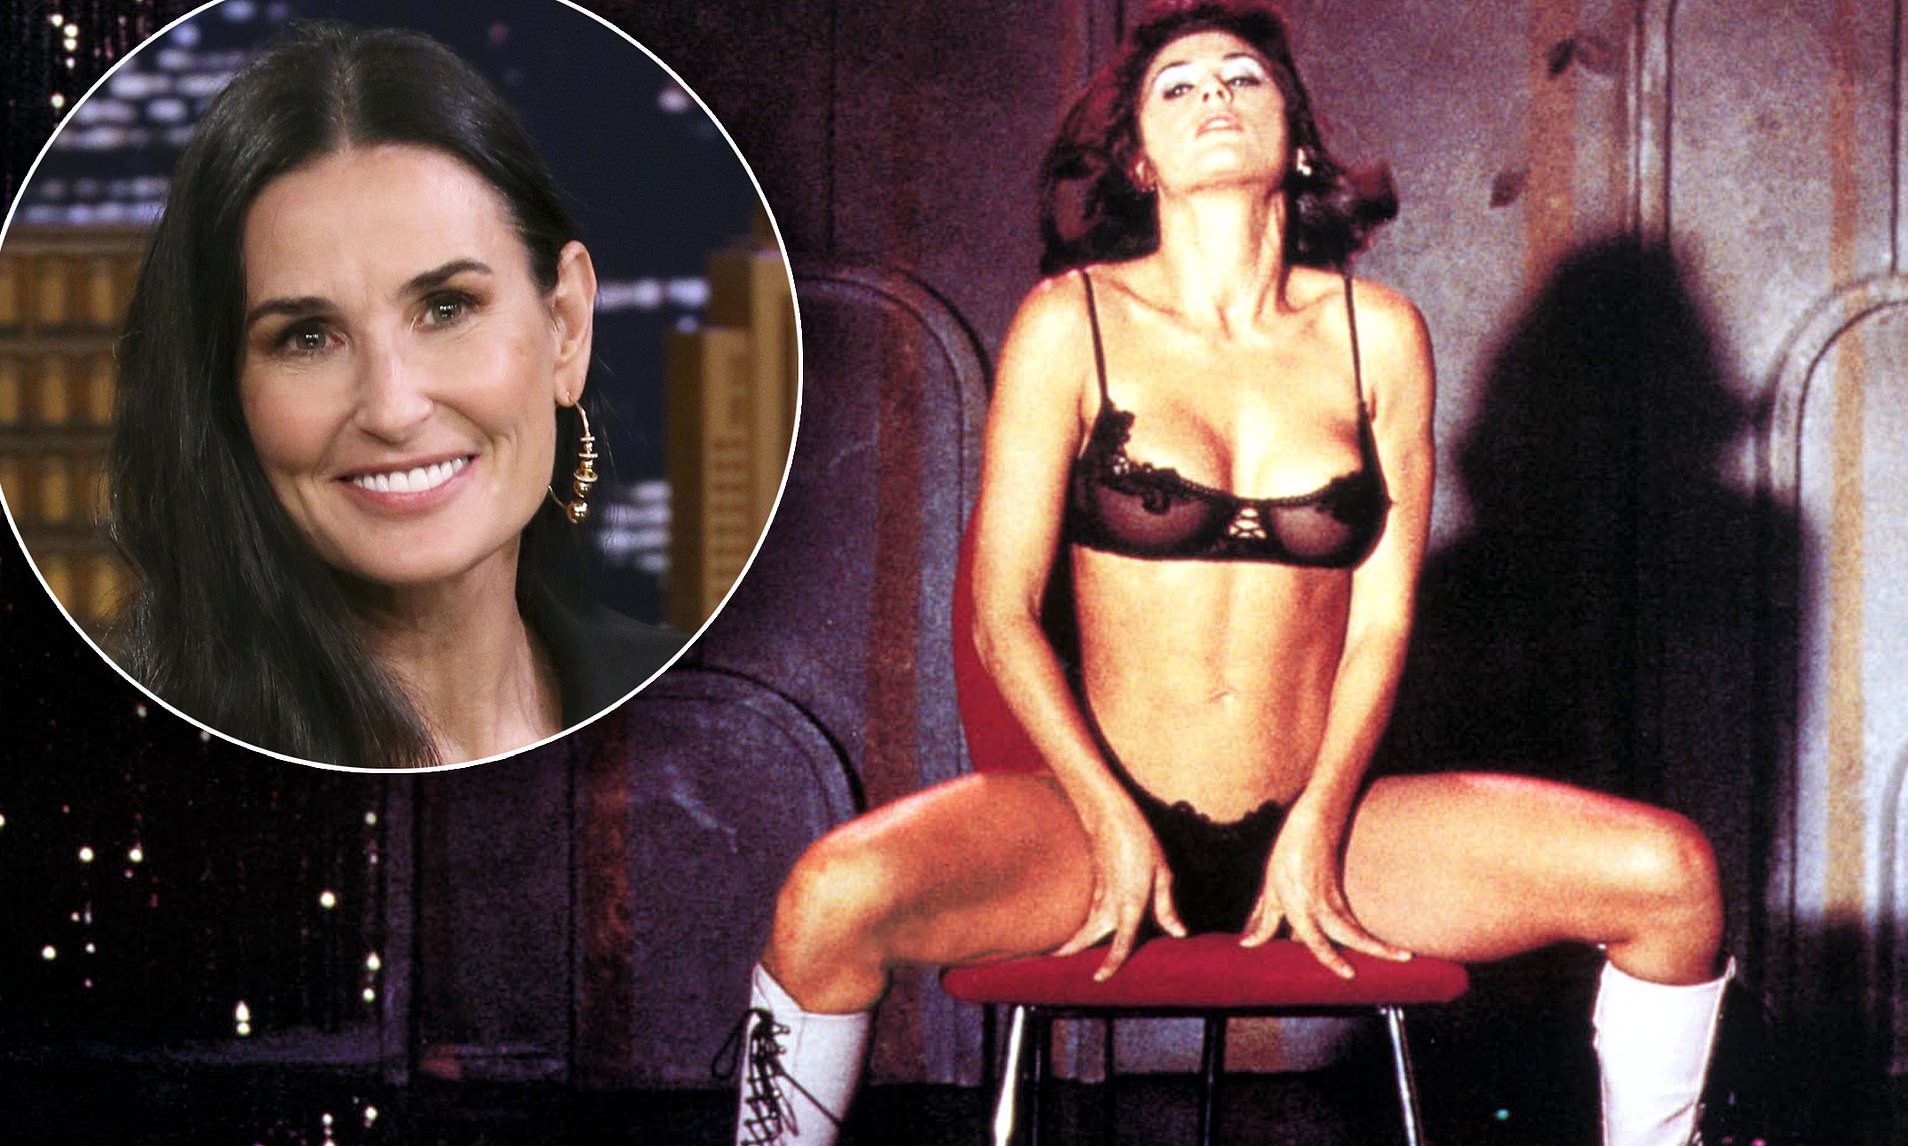 christopher bankhead recommends demi moore strip scene pic